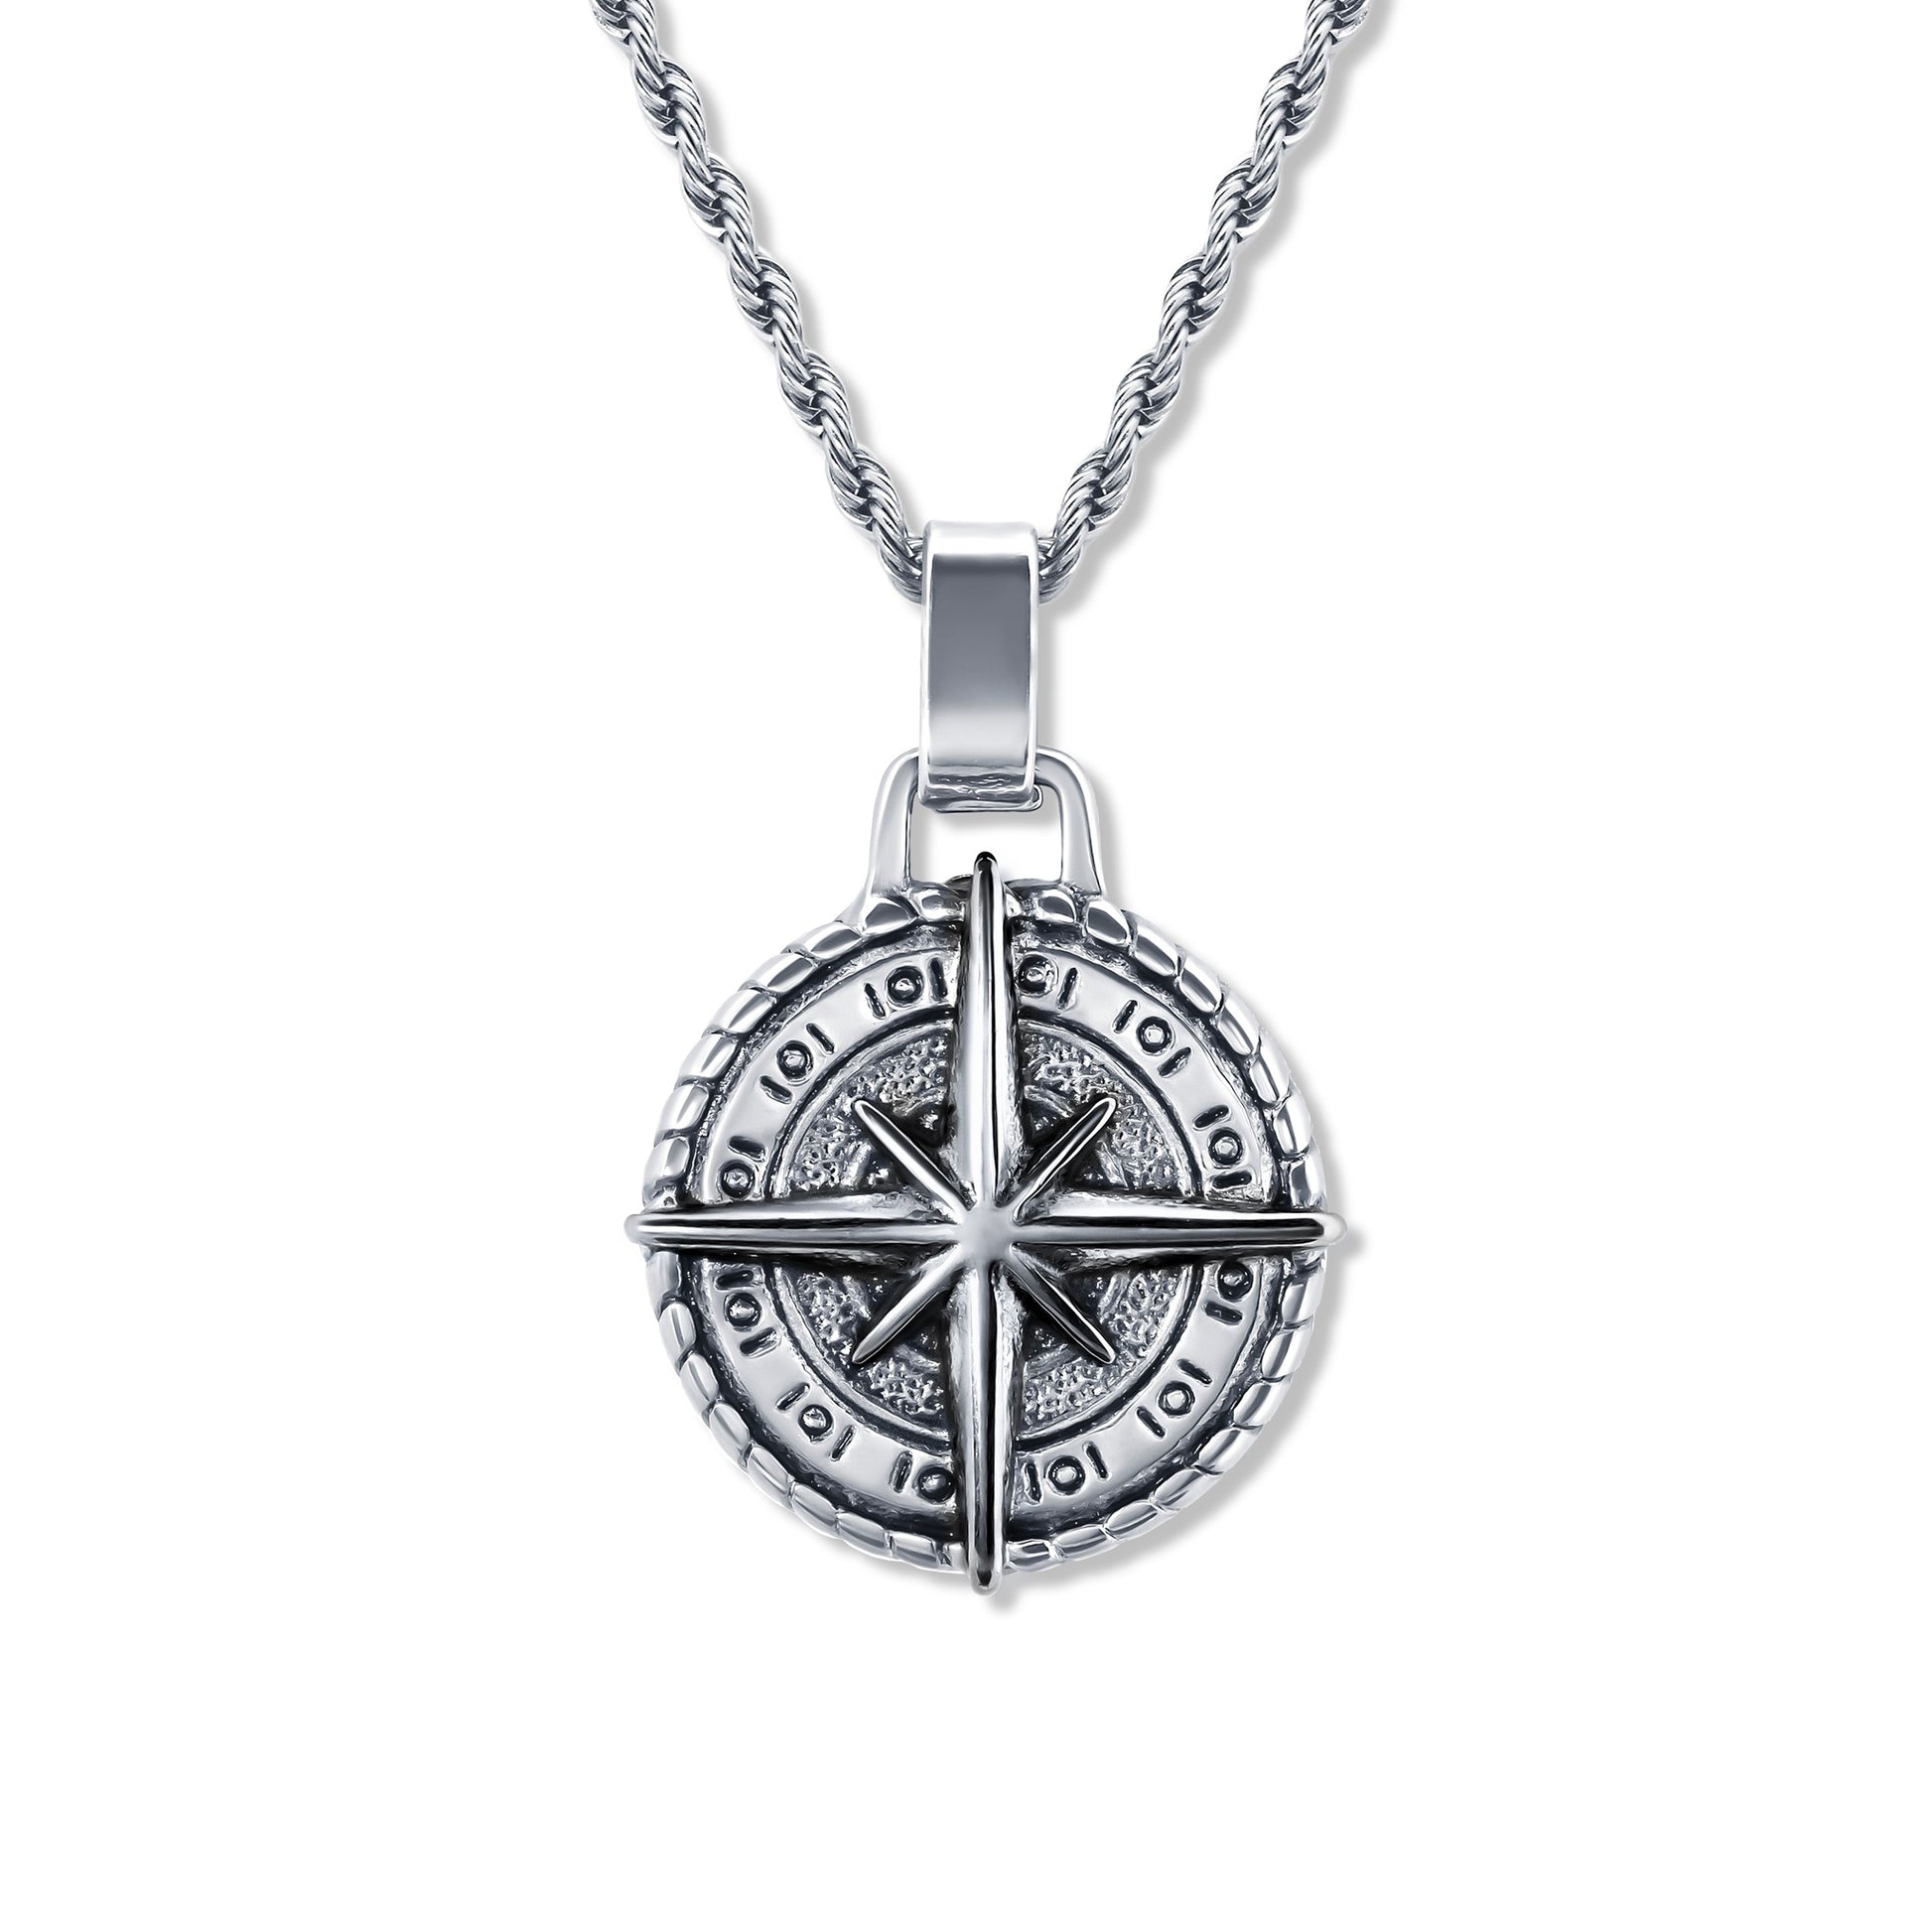 Compass North Star Silver Pendant with 3mm Silver Rope chain on white background